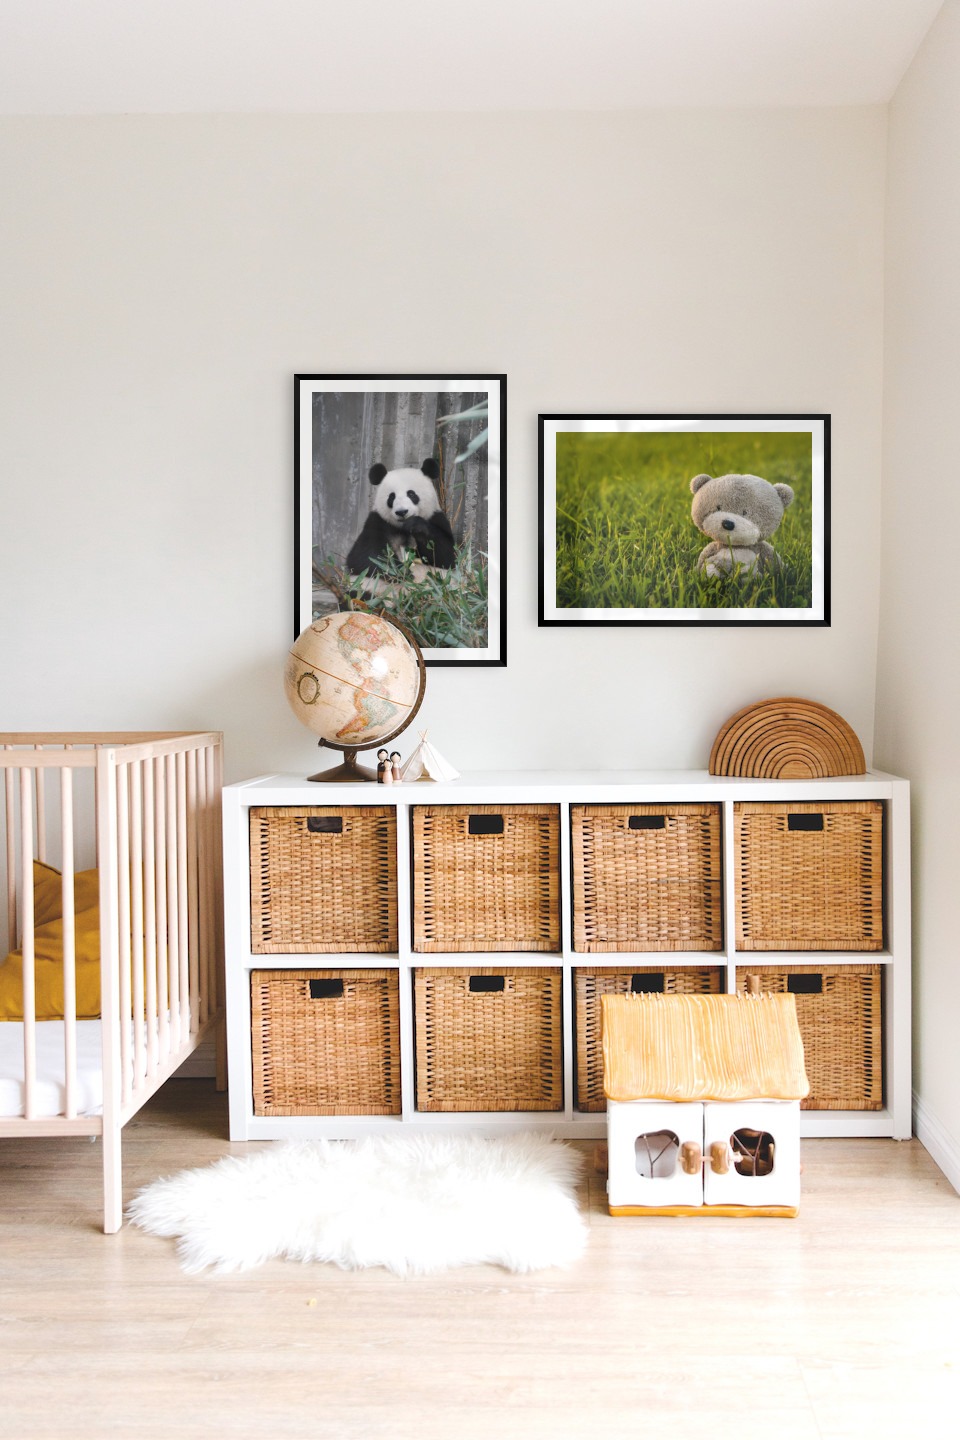 Gallery wall with picture frames in black in sizes 50x70 with prints "Panda" and "Teddy bear in a field"